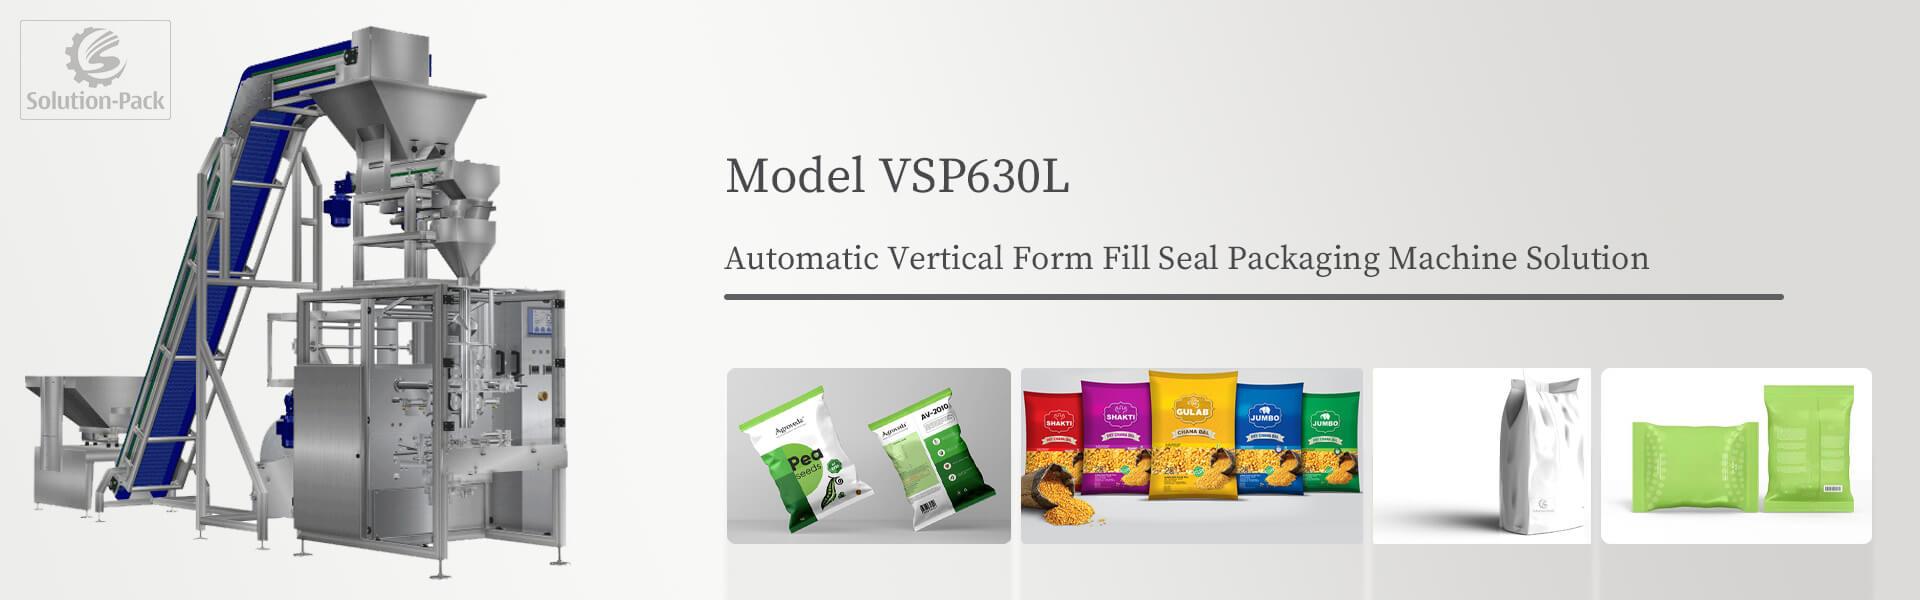 Solution-Pack | Model VSP630L vertical form fill seal machine packaging solution | Heading Banner Picture